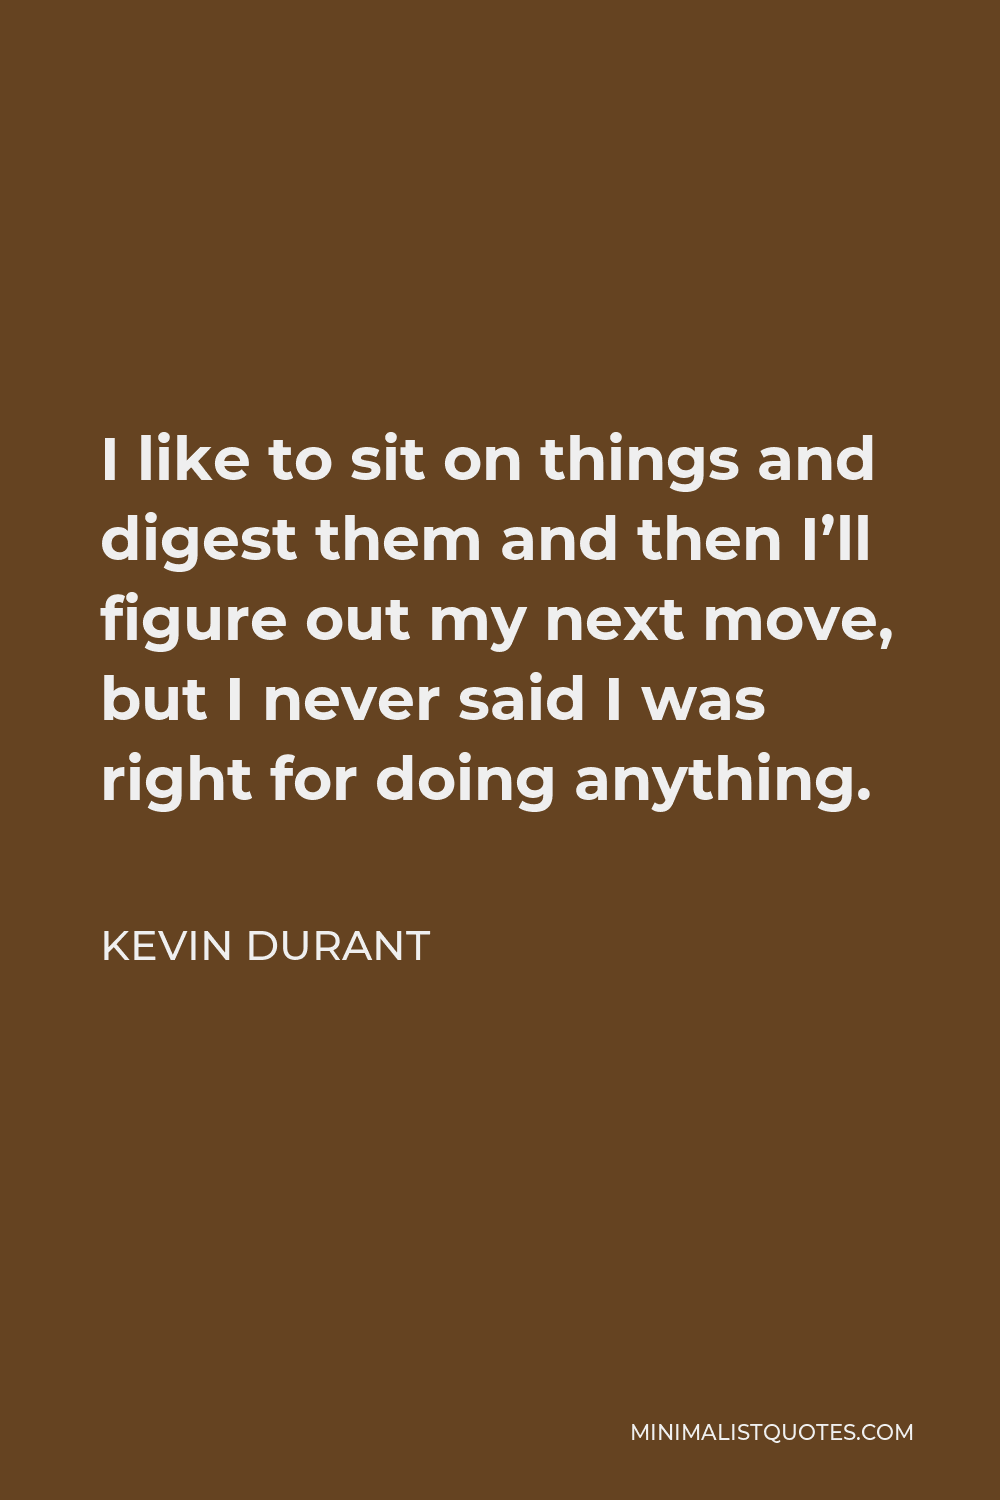 Kevin Durant Quote - I like to sit on things and digest them and then I’ll figure out my next move, but I never said I was right for doing anything.